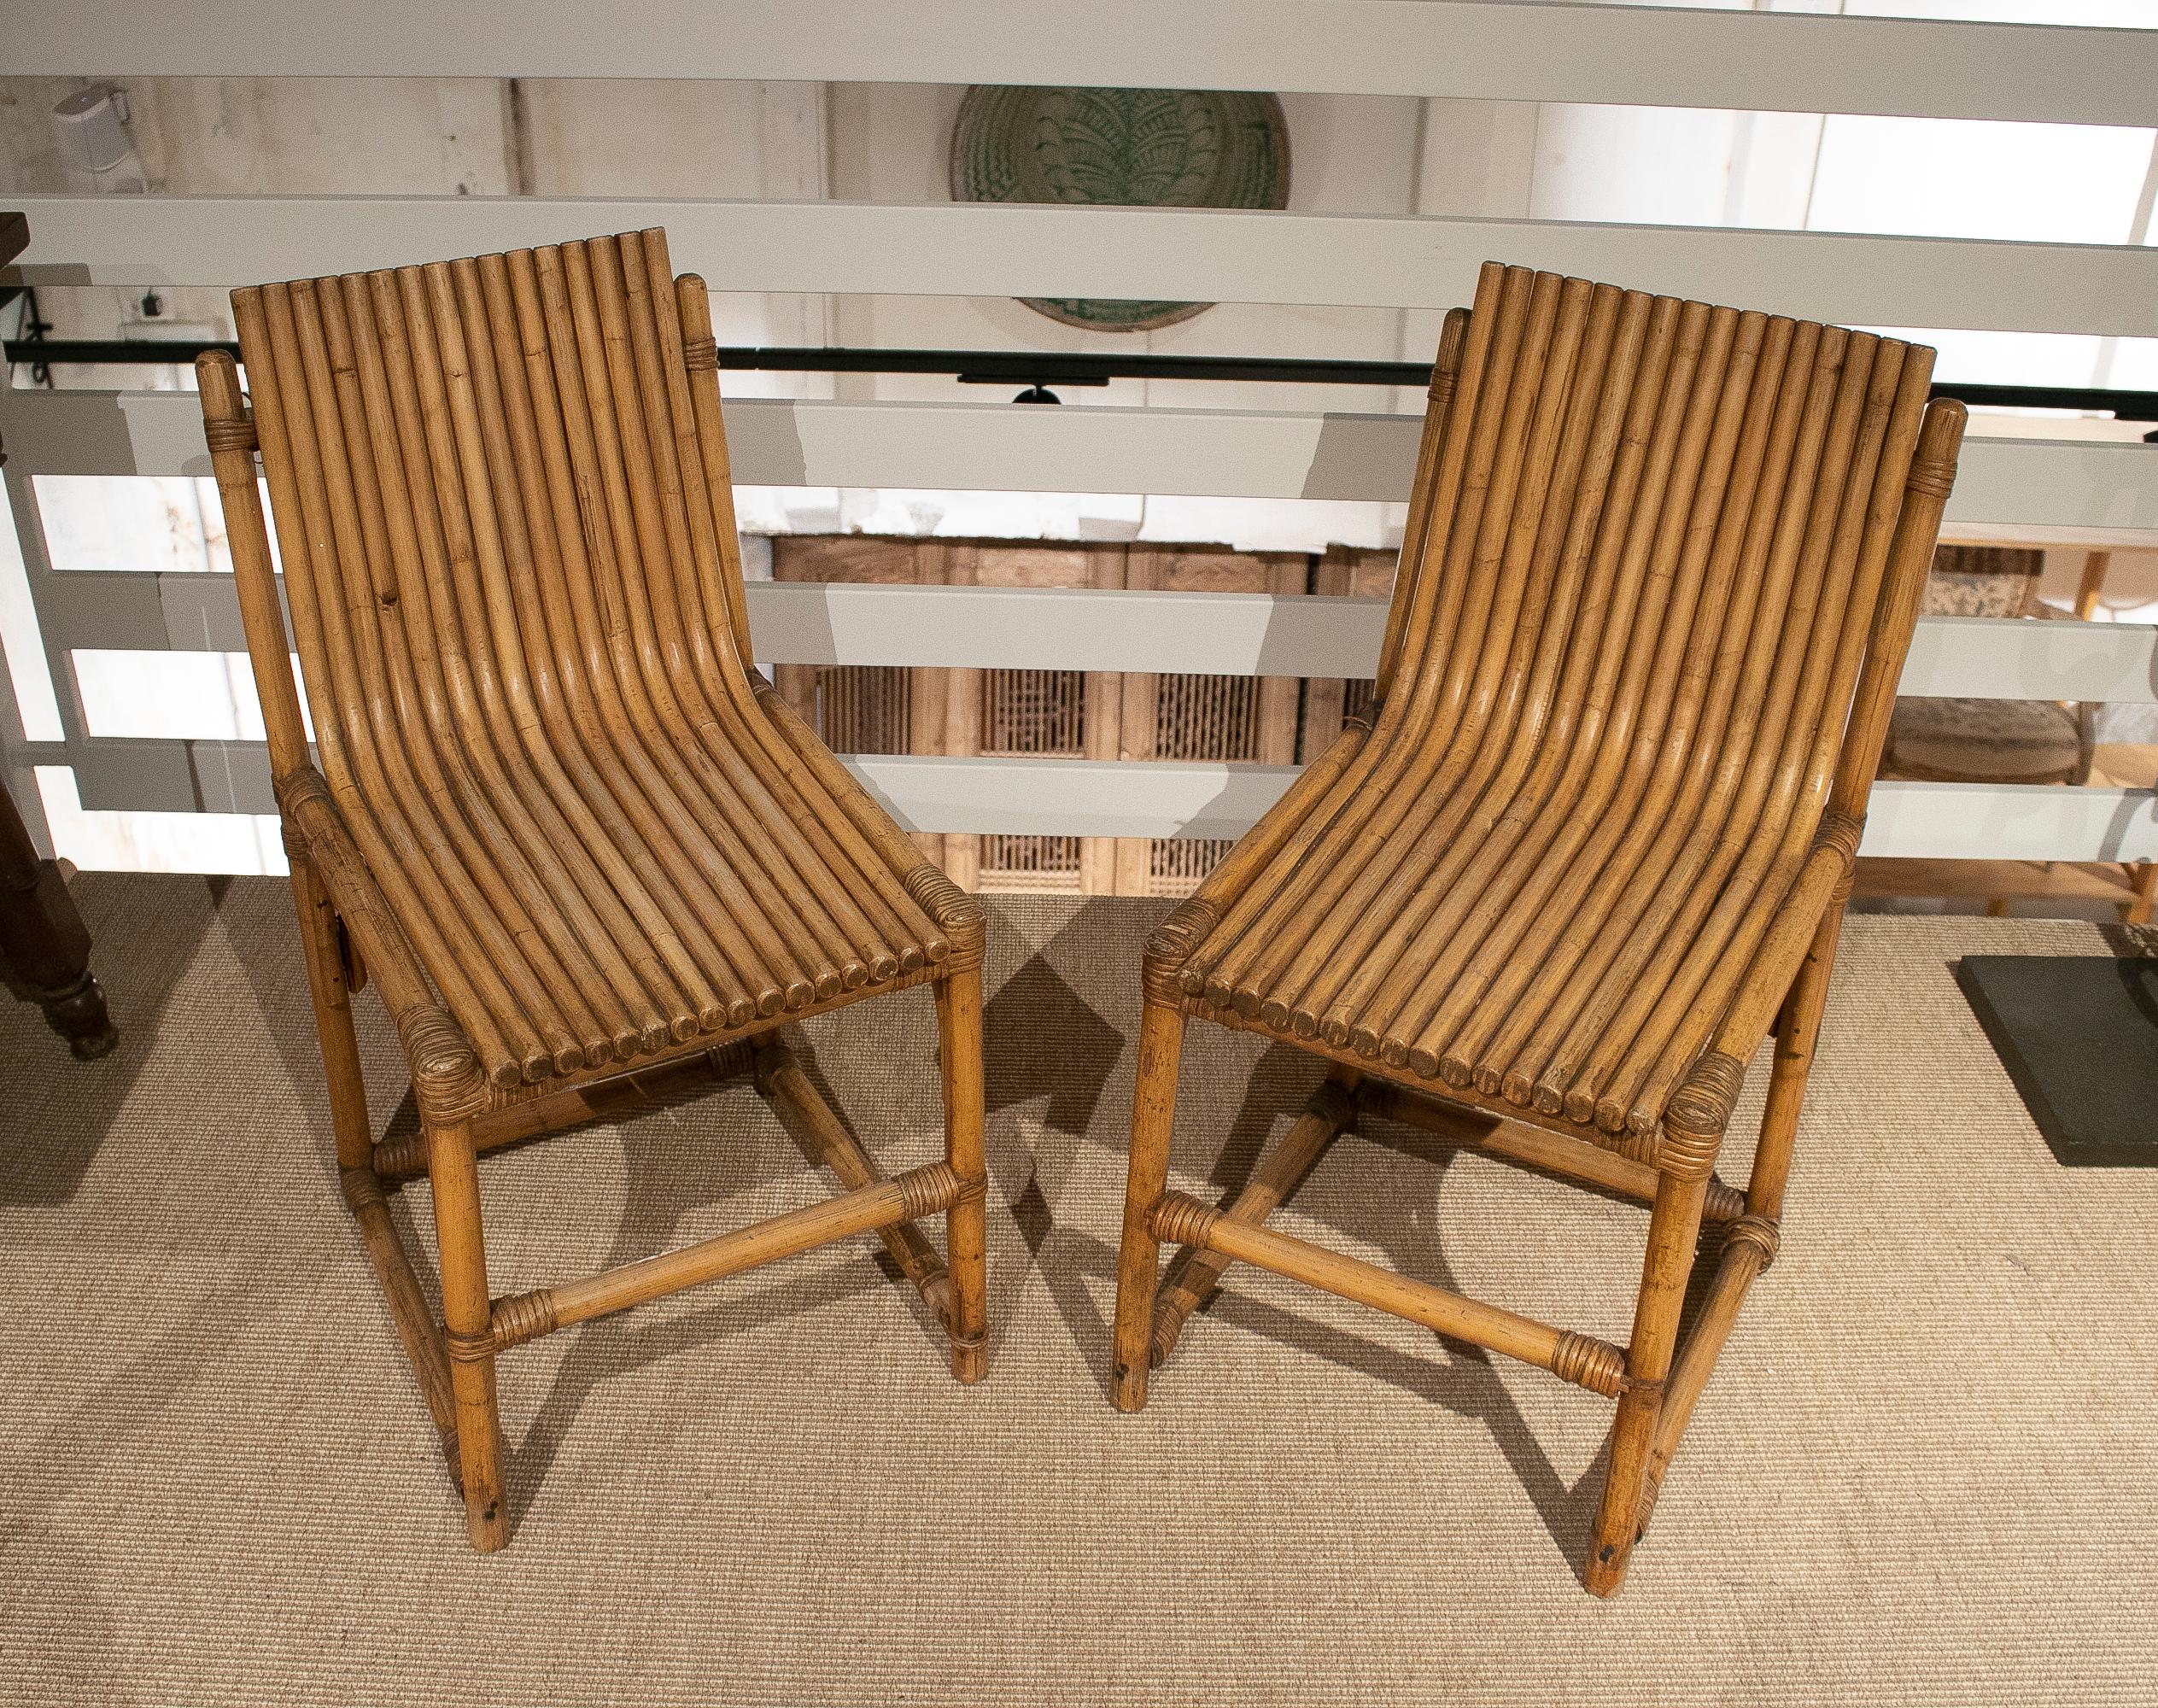 Pair of vintage 1980s Spanish bamboo chairs.